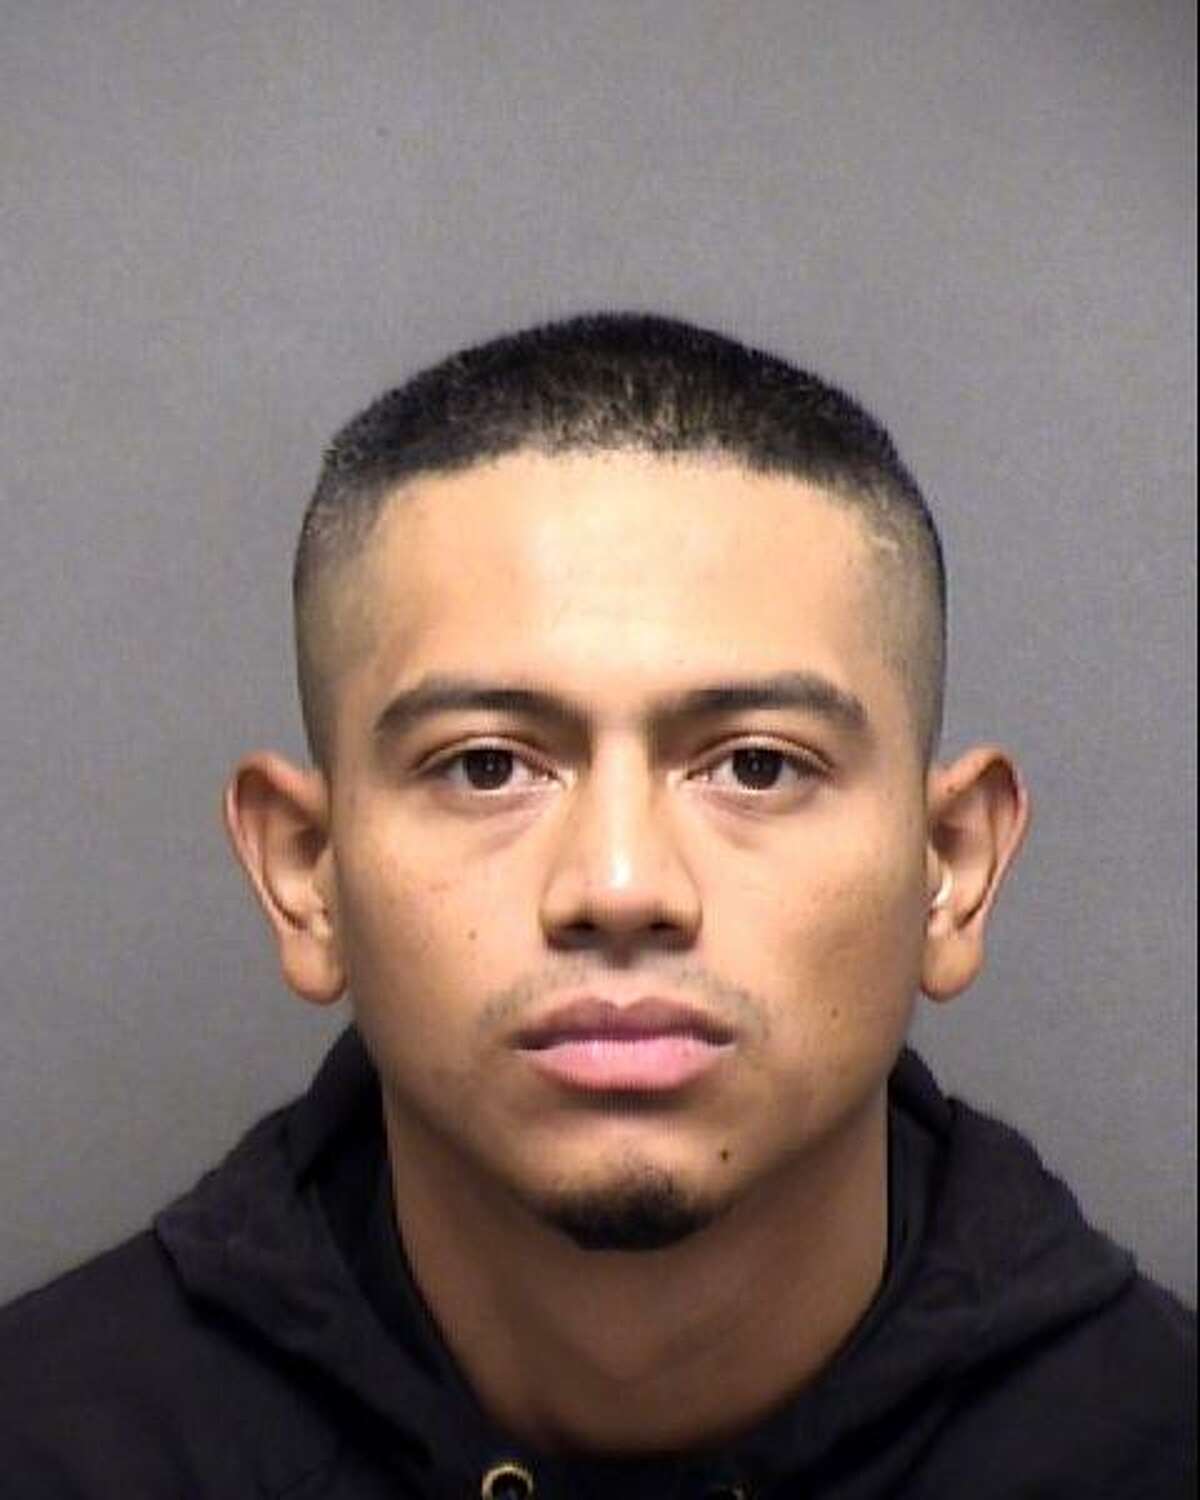 Daniel Calvillo, 28, was charged with capital murder and unlawful carrying of a weapon in connection with the shooting death of a 24-year-old woman.